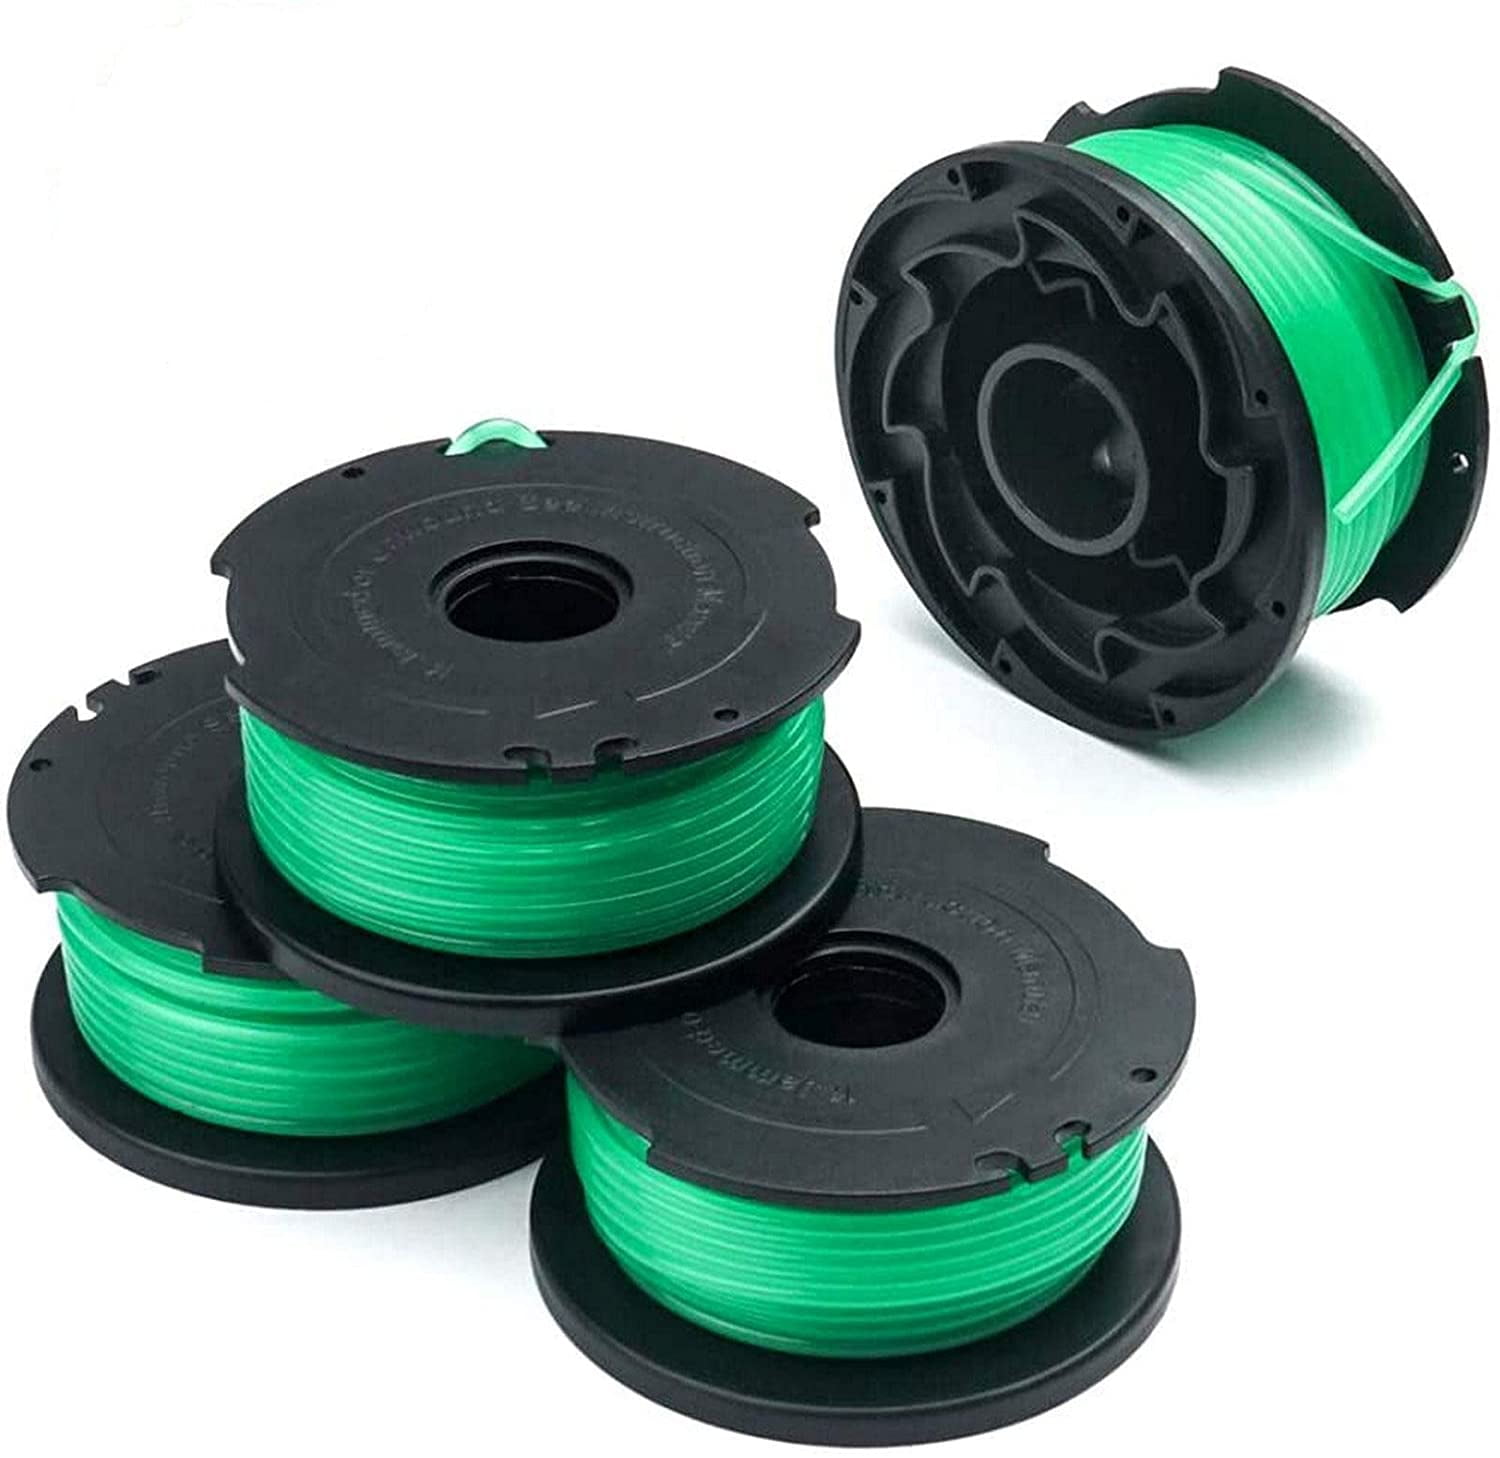 SF-080 Replacement Spool, SF 080 trimmer,20ft 0.080 inch for Black and  Decker GH3000 LST540 LST540B GH3000R SF-080-BKP Auto Feed Spool Single Line